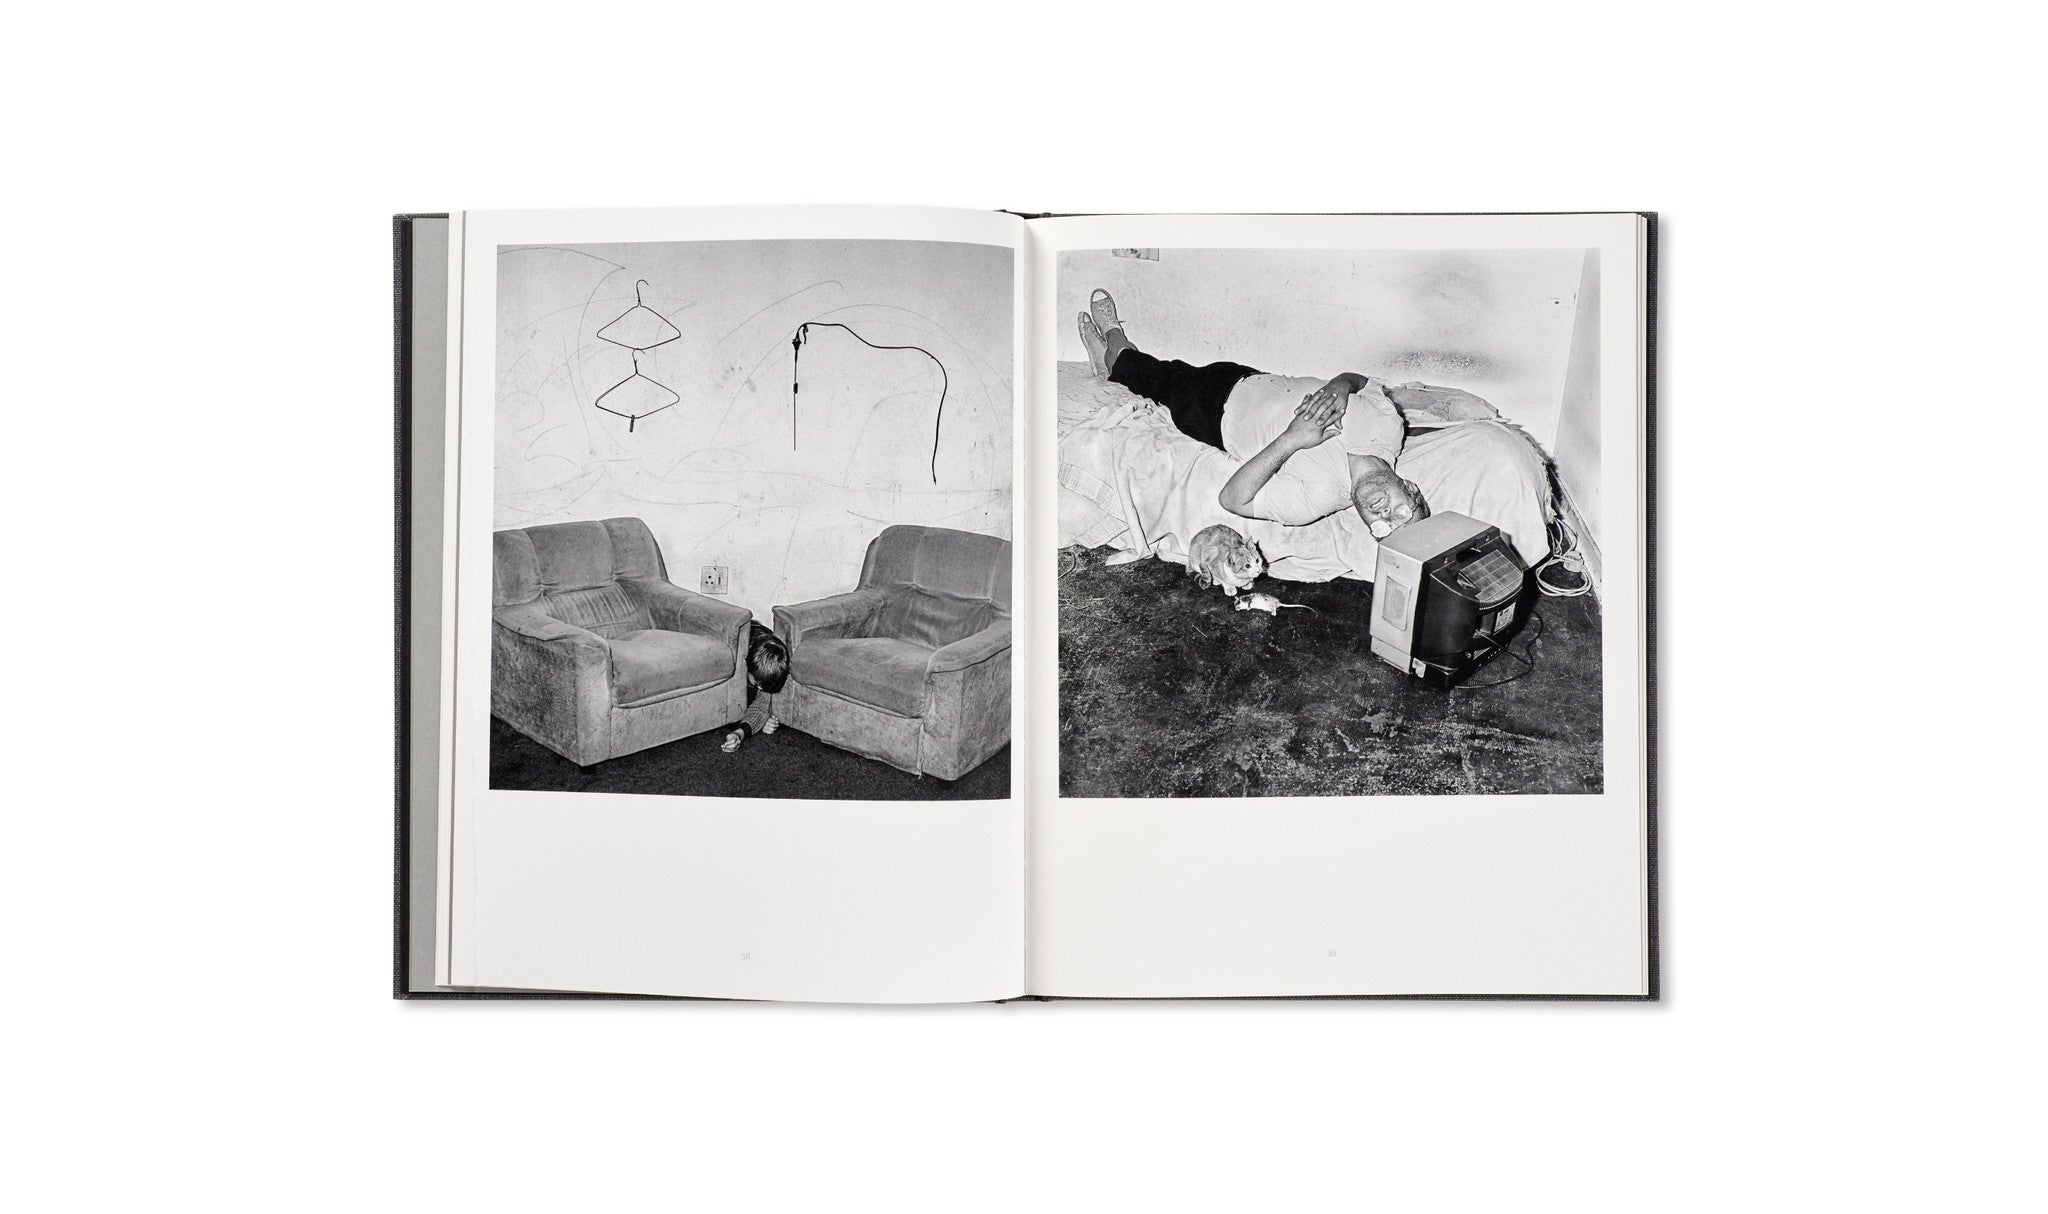 THE HOUSE PROJECT by Roger Ballen & Didi Bozzini [SIGNED]